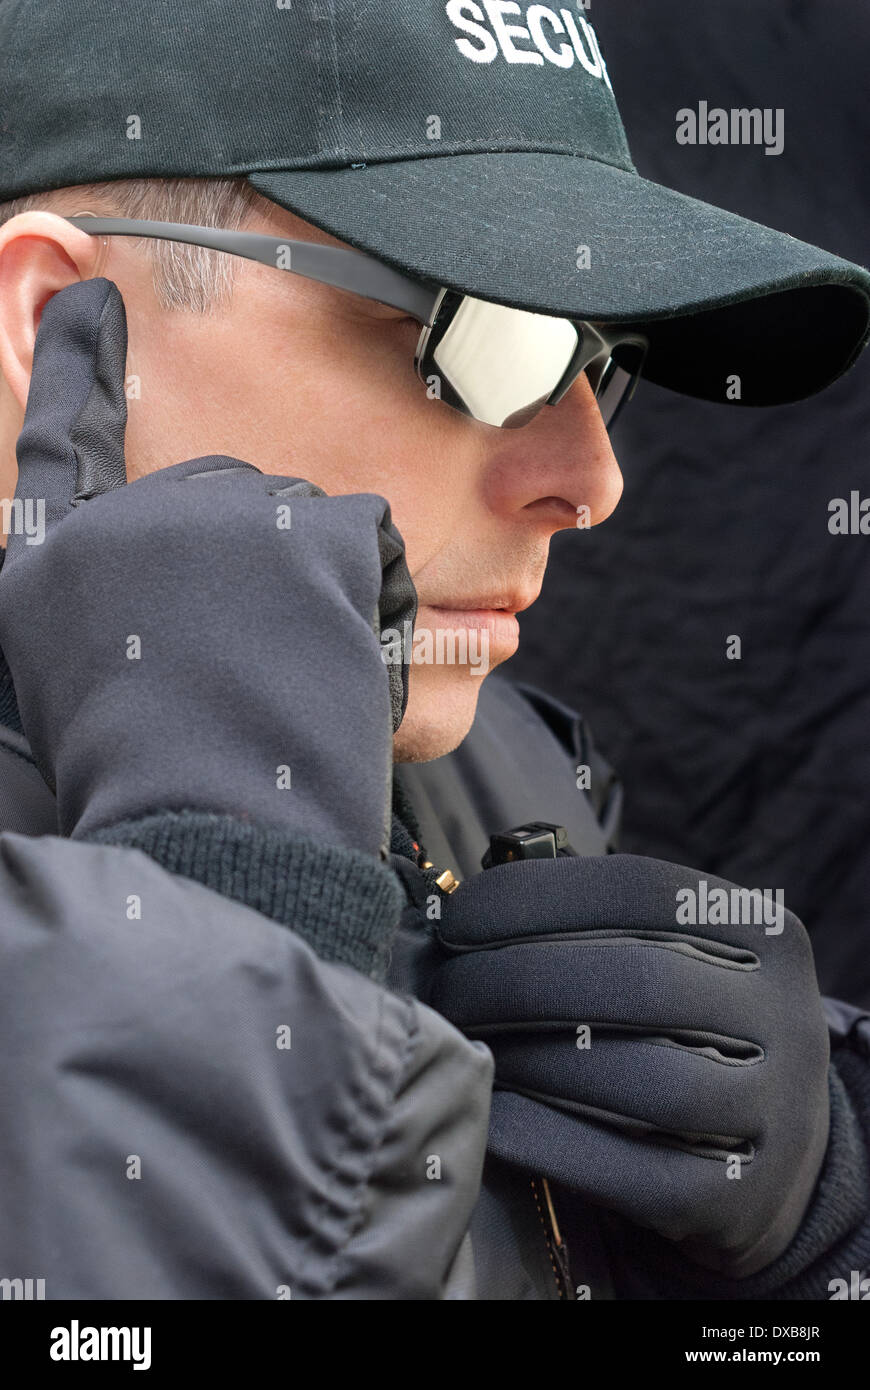 Close-up of a close protection officer listening to his earpiece. Stock Photo